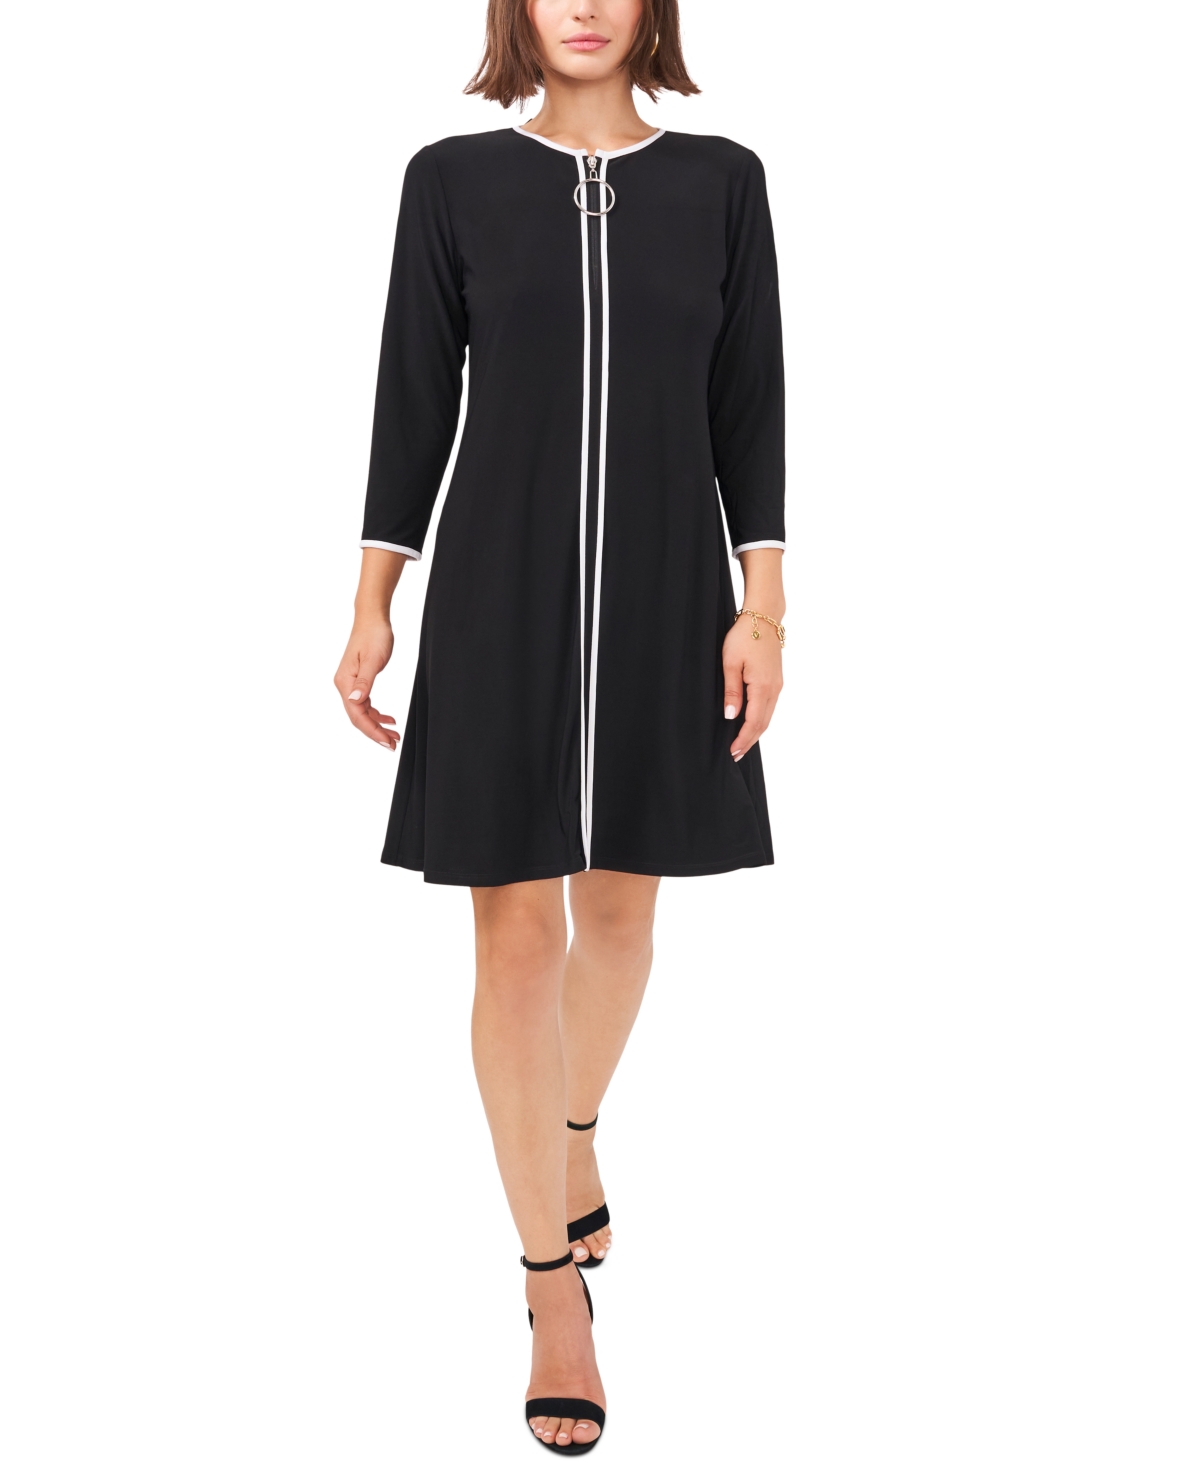 Msk 3/4-Sleeve Piped Fit & Flare Dress